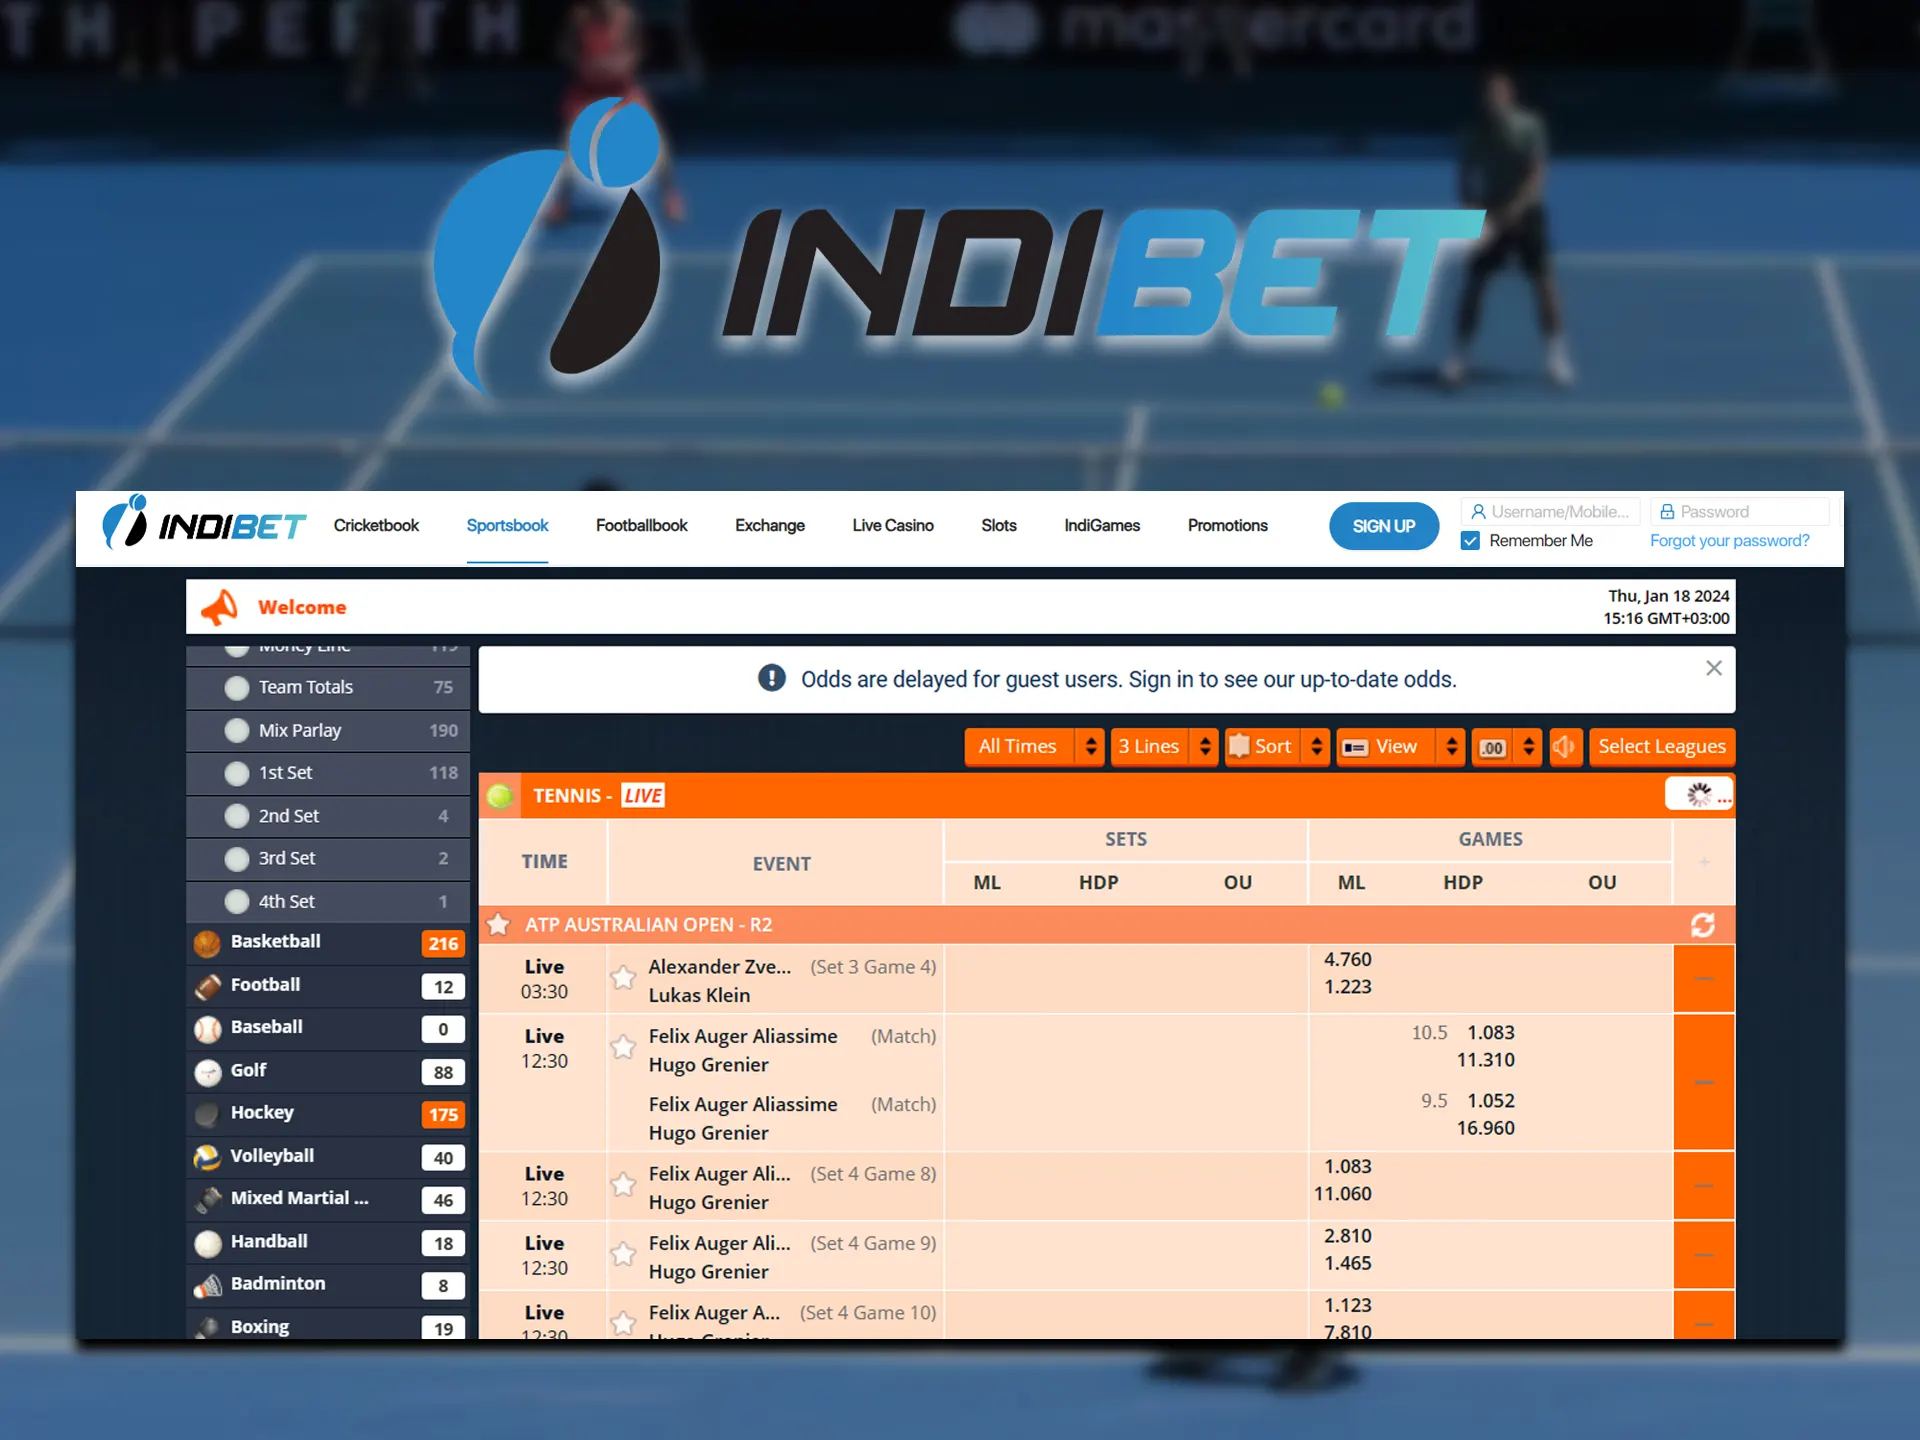 Bookmaker Indibet offers tennis betting and gives a generous welcome offer.